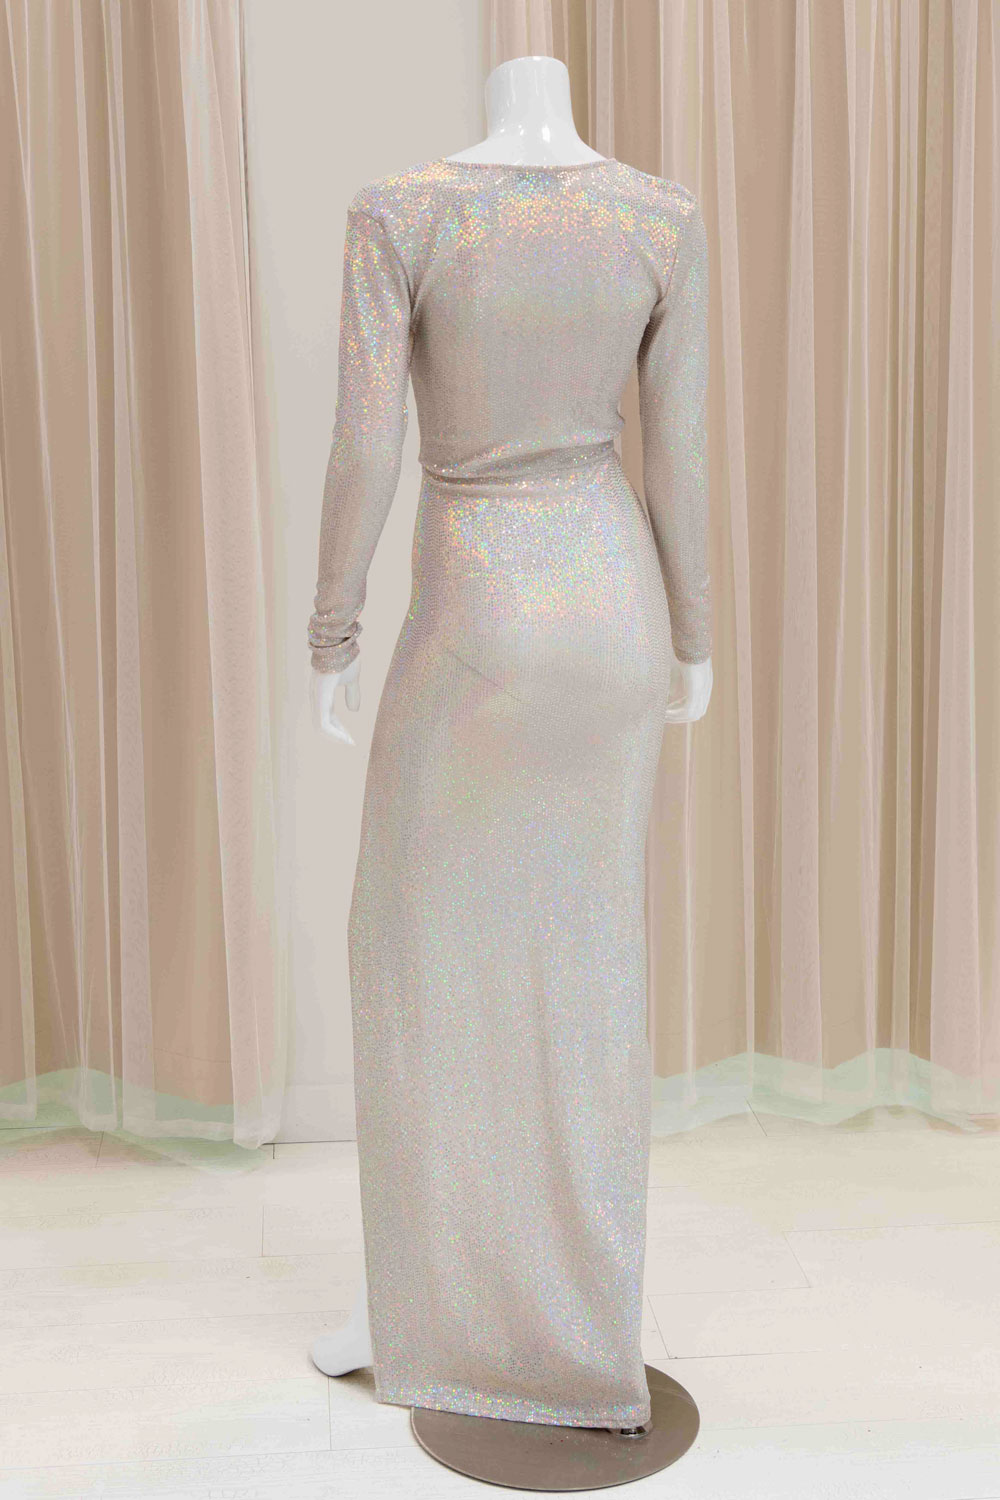 Nayomi Long Sleeve Evening Gown in Iridescent White